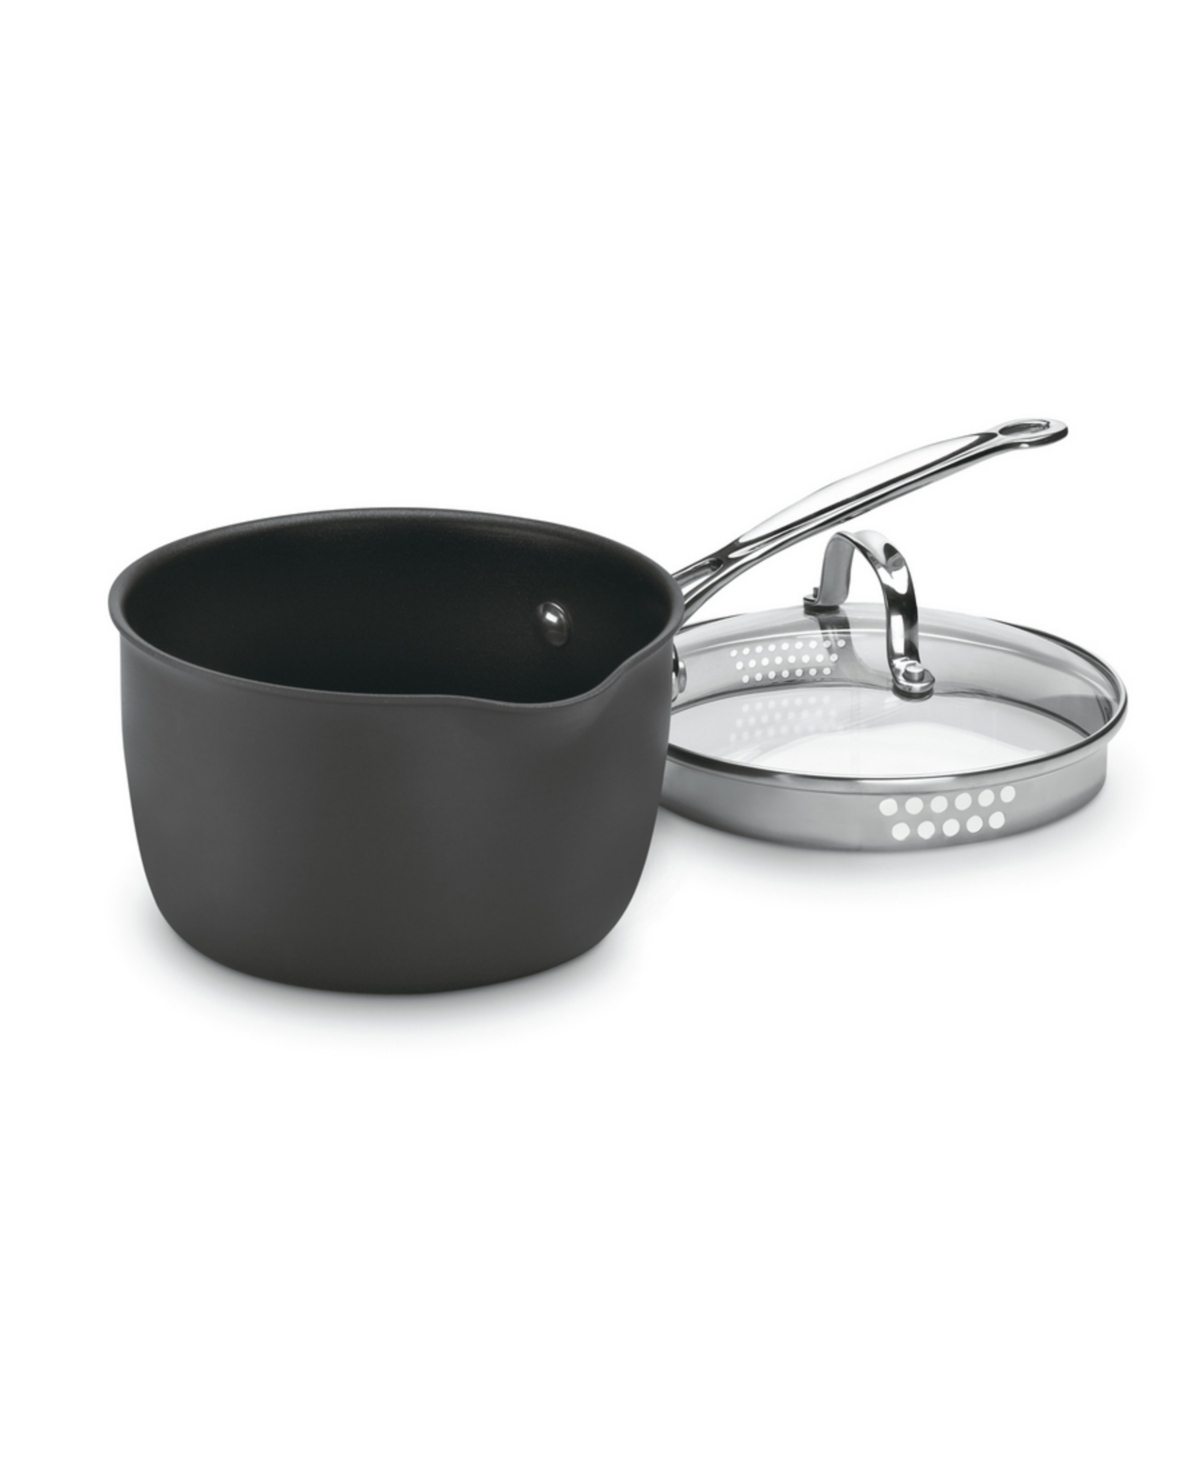 Cuisinart Chefs Classic Hard Anodized 3-qt. Cook And Pour Saucepan W/ Cover In Black